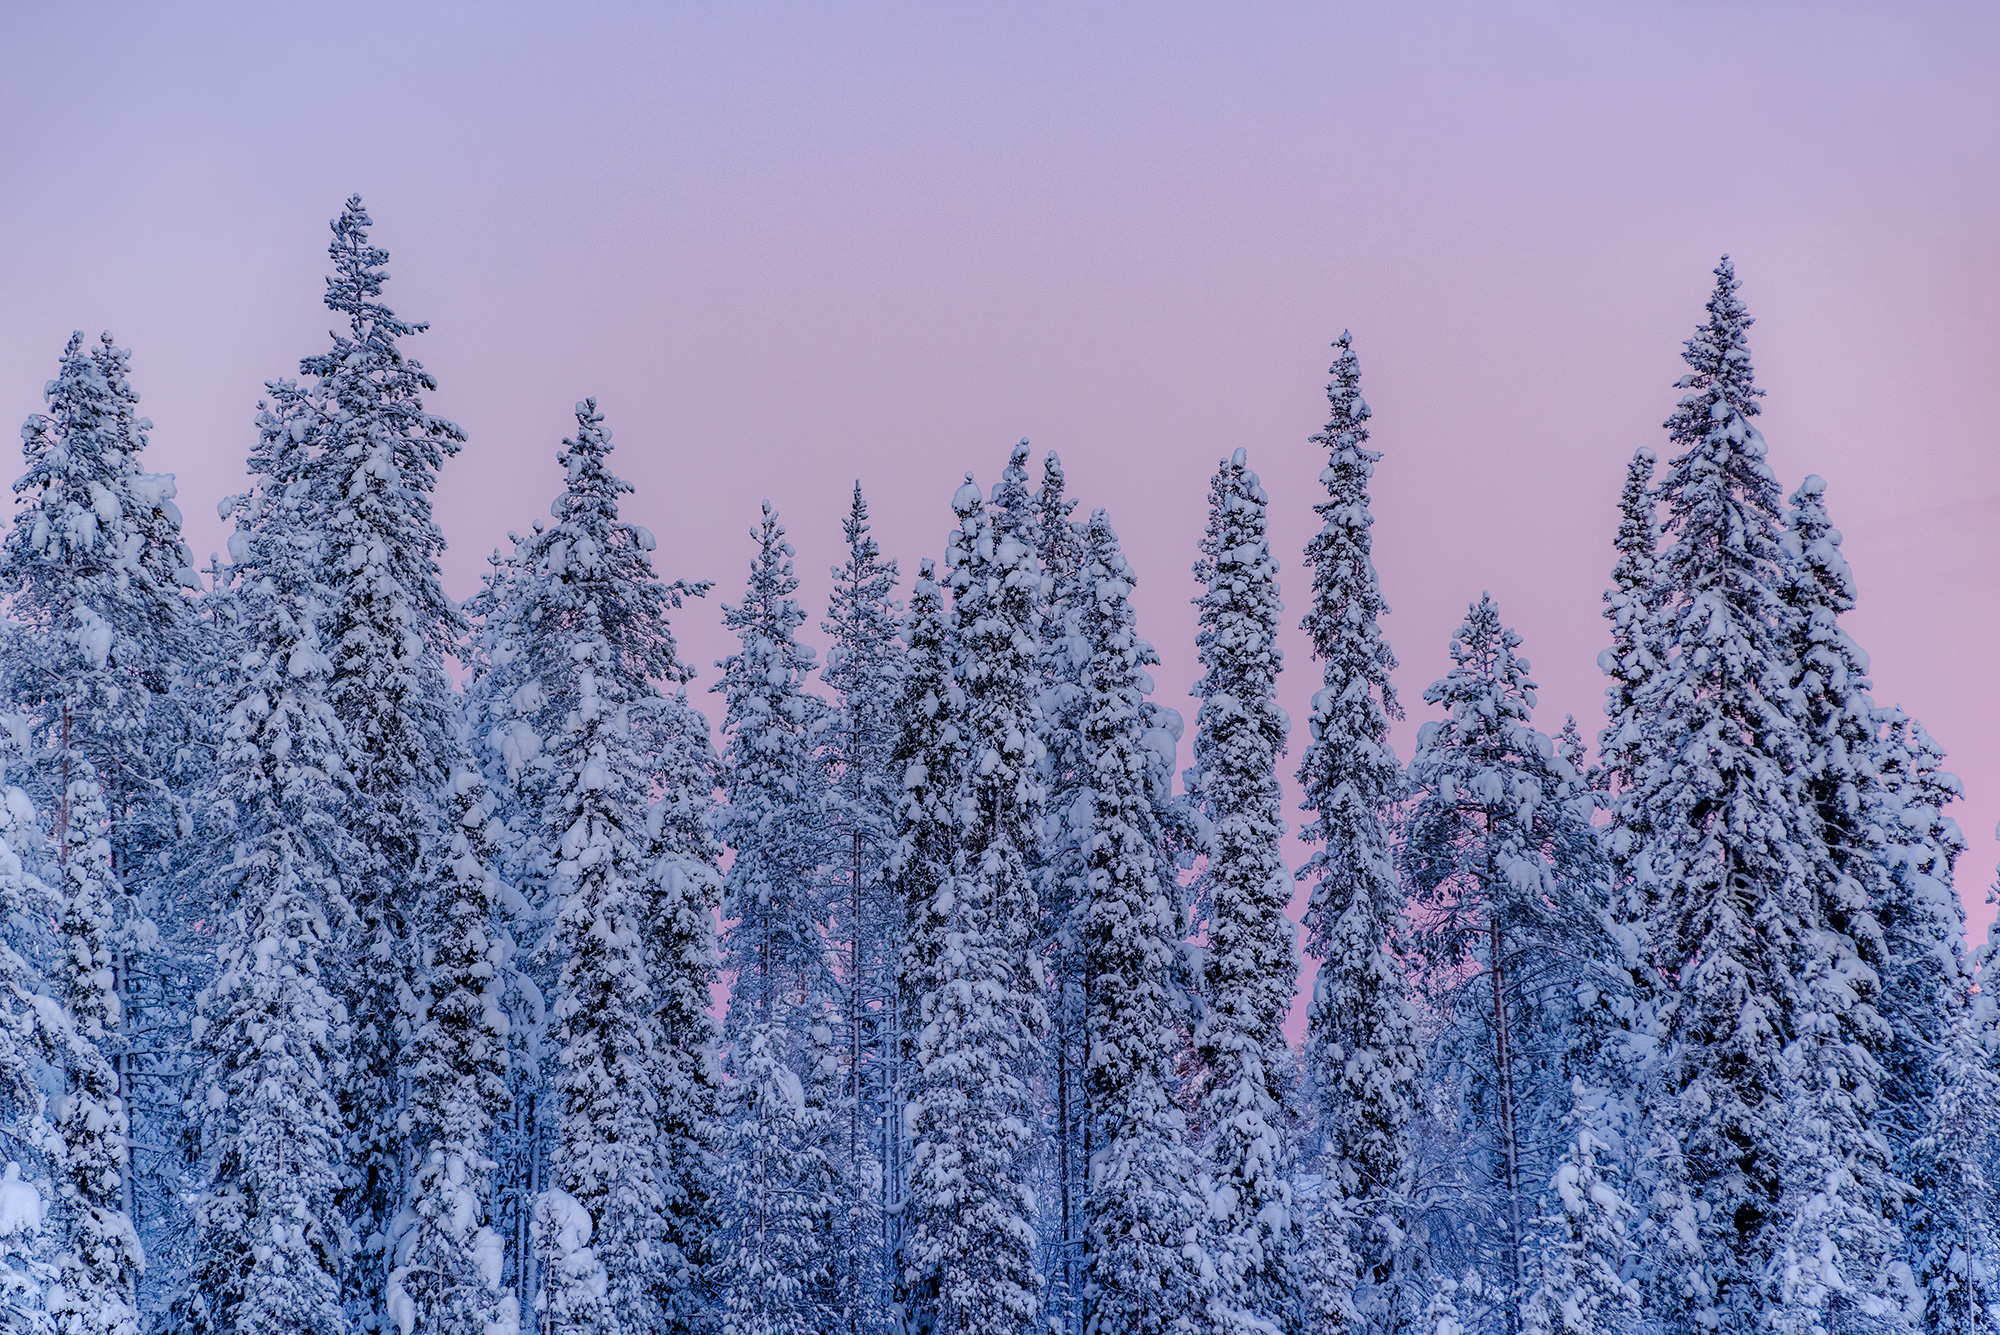 Photograph of a Lapland fir forest covered with snow at sunset.